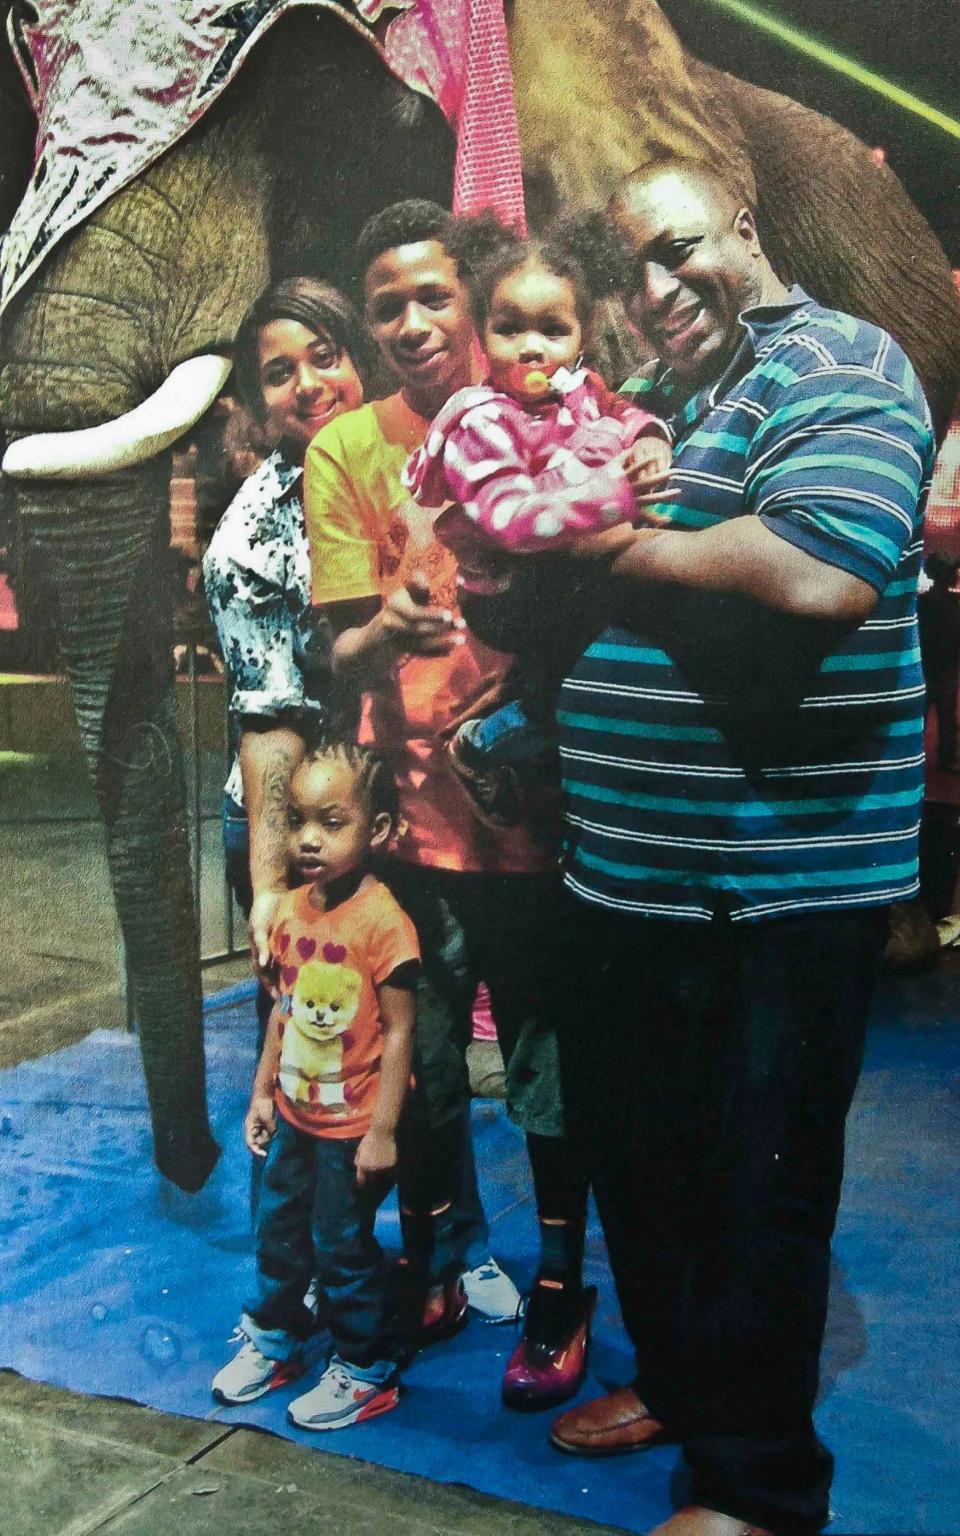 Eric Garner, right, poses with his children during a family outing - Family photo via National Action Network